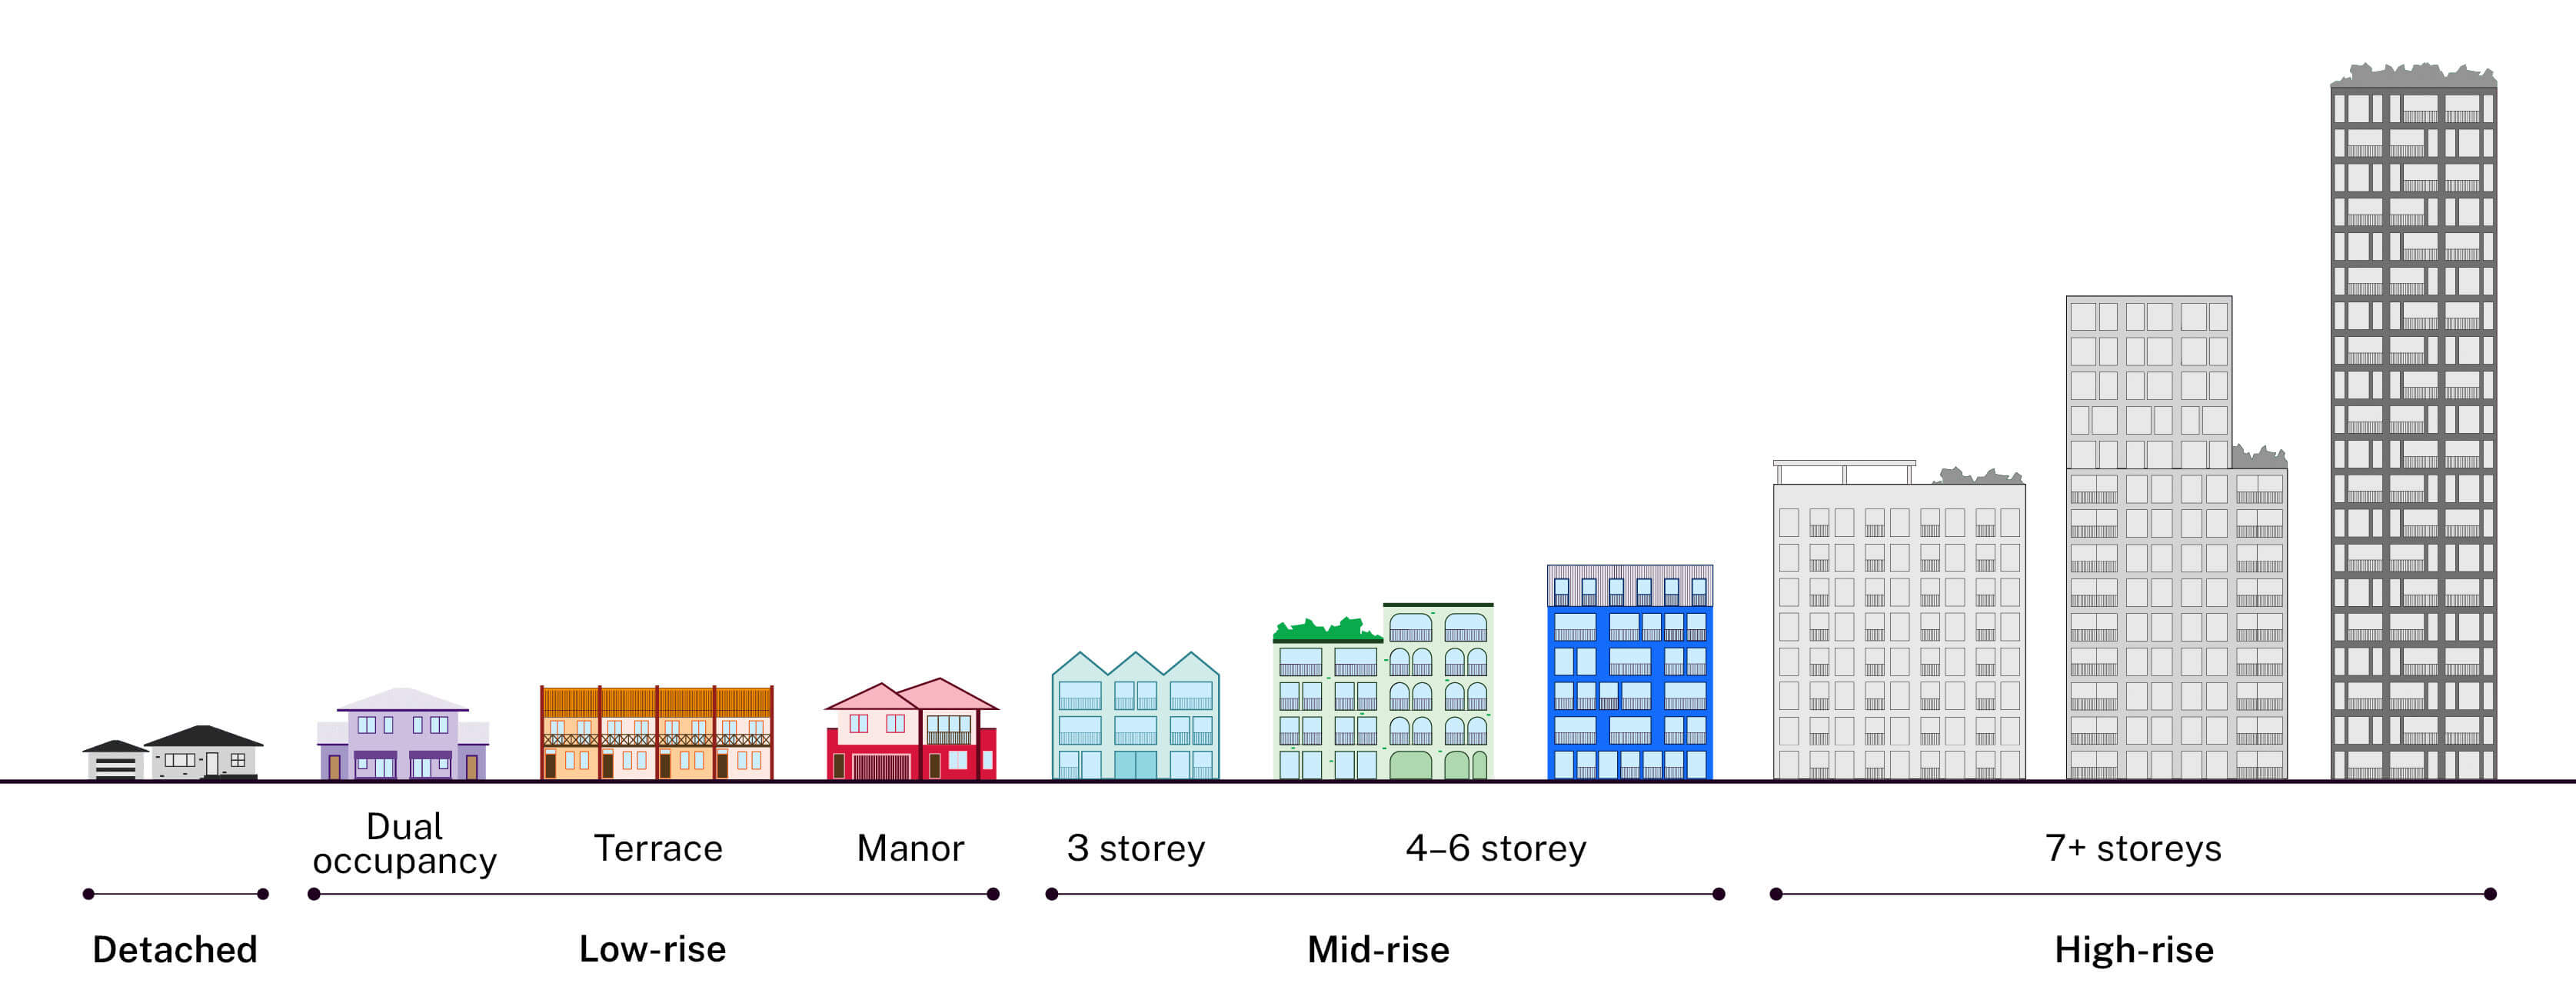 Housing types based on heights for detached, low-rise, mid-rise and high-rise. Credit: NSW Department of Planning, Housing and Infrastructure